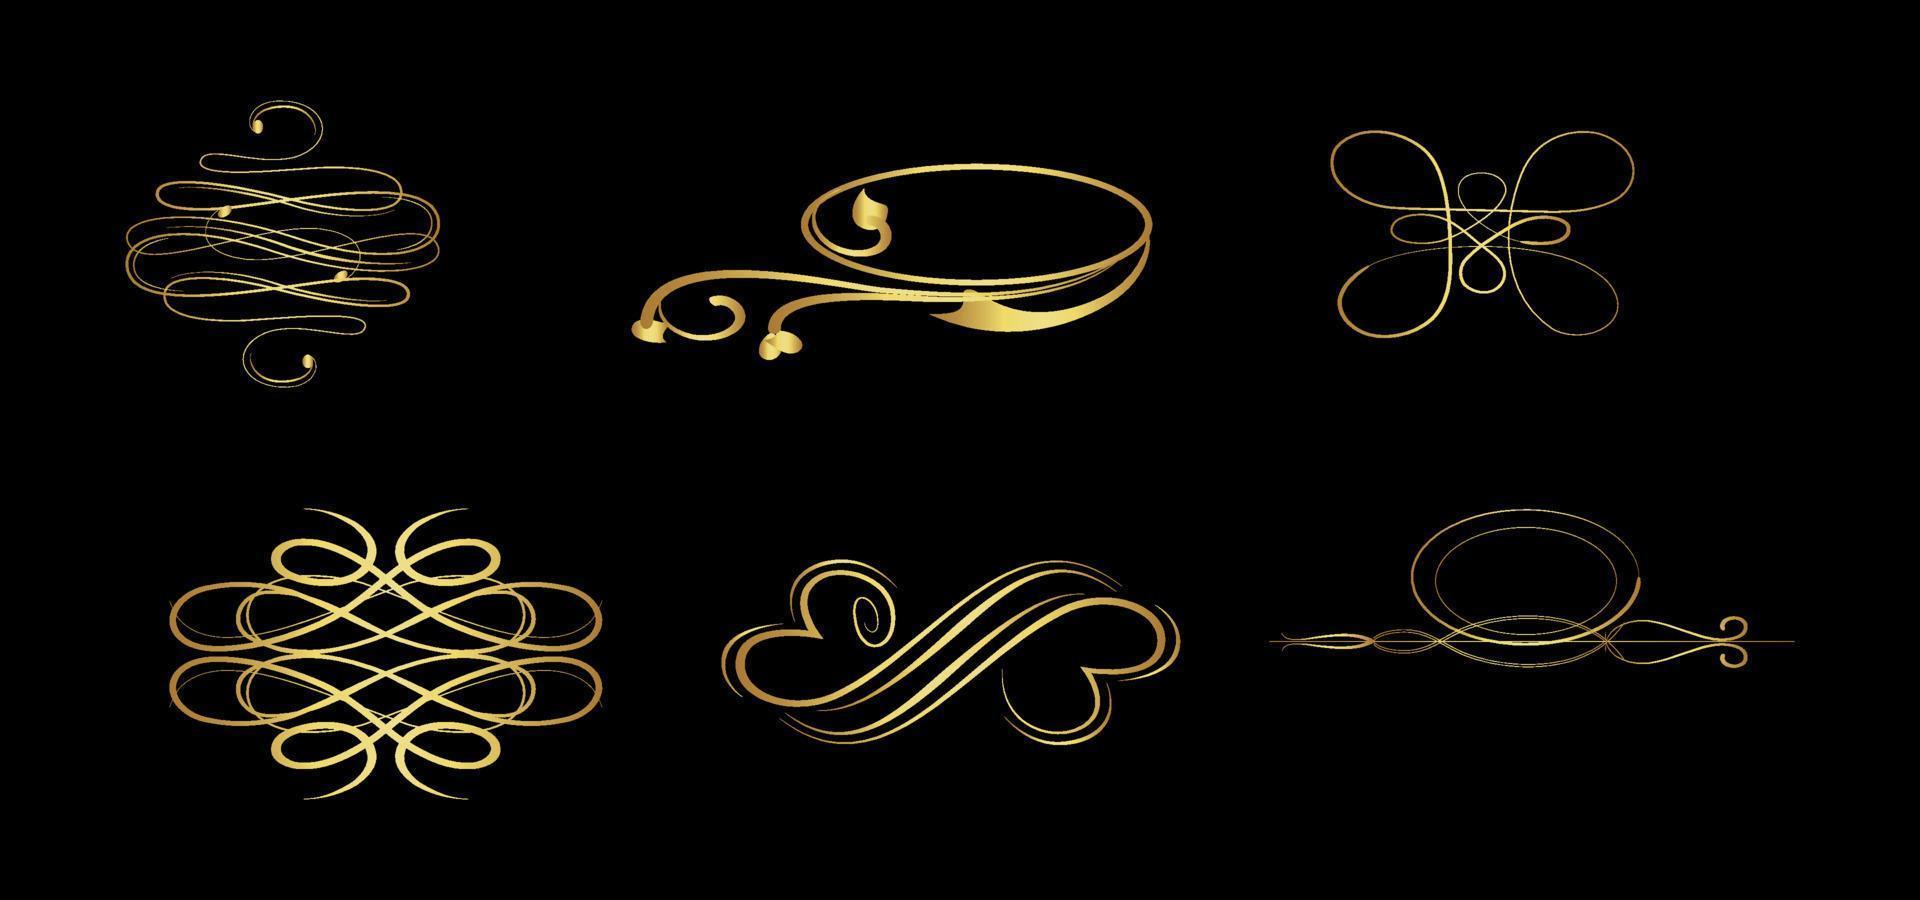 Gold Calligraphic ornament set. Vintage Decorations calligraphic Ornaments, Frames, dividers, borders, frames and lines. For Invitations, Banners, Posters, Placards, Badges. vector